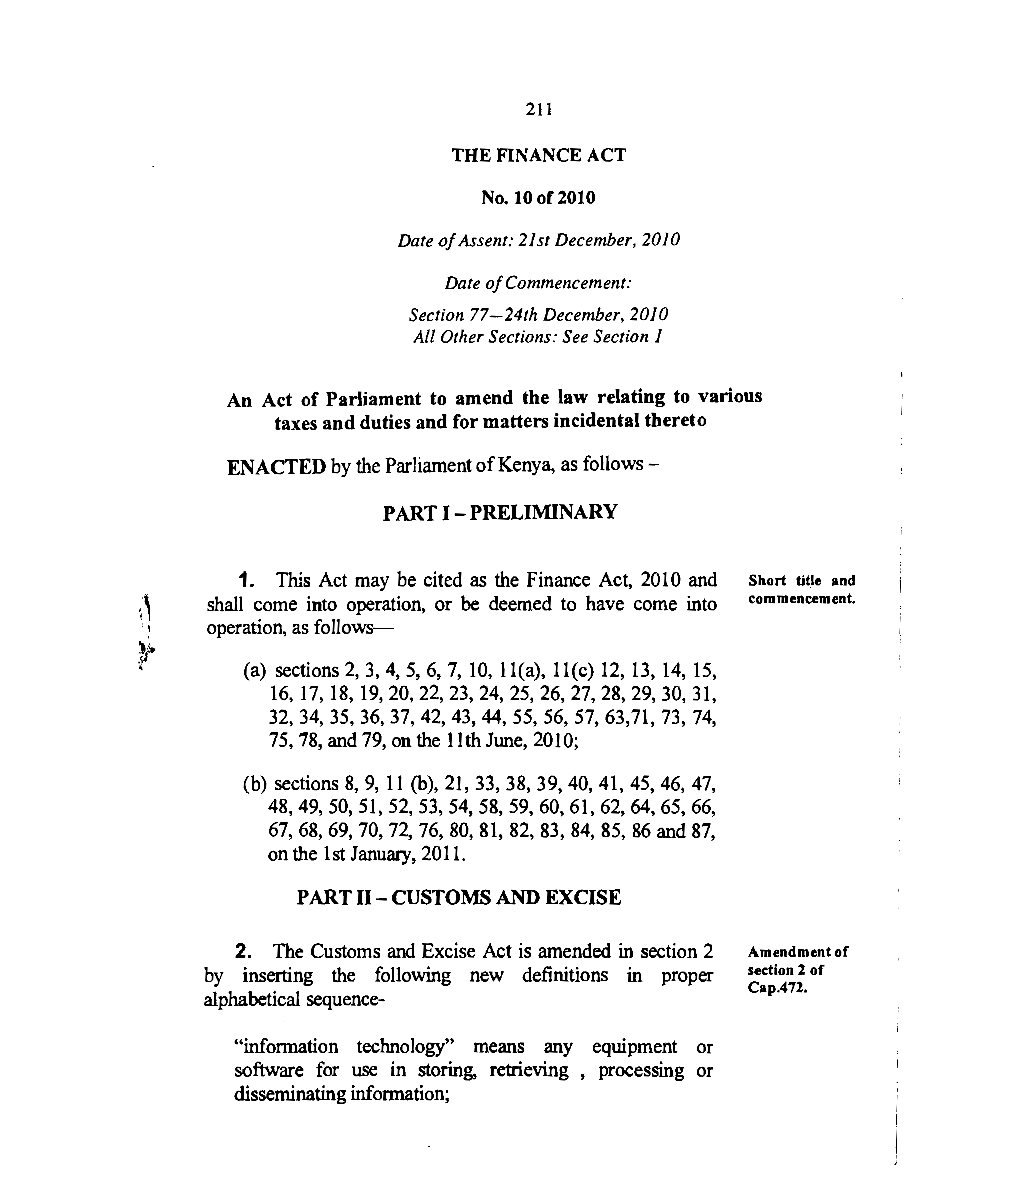 THE FINANCE ACT No. 10 of 2010 an Act of Parliament to Amend the Law